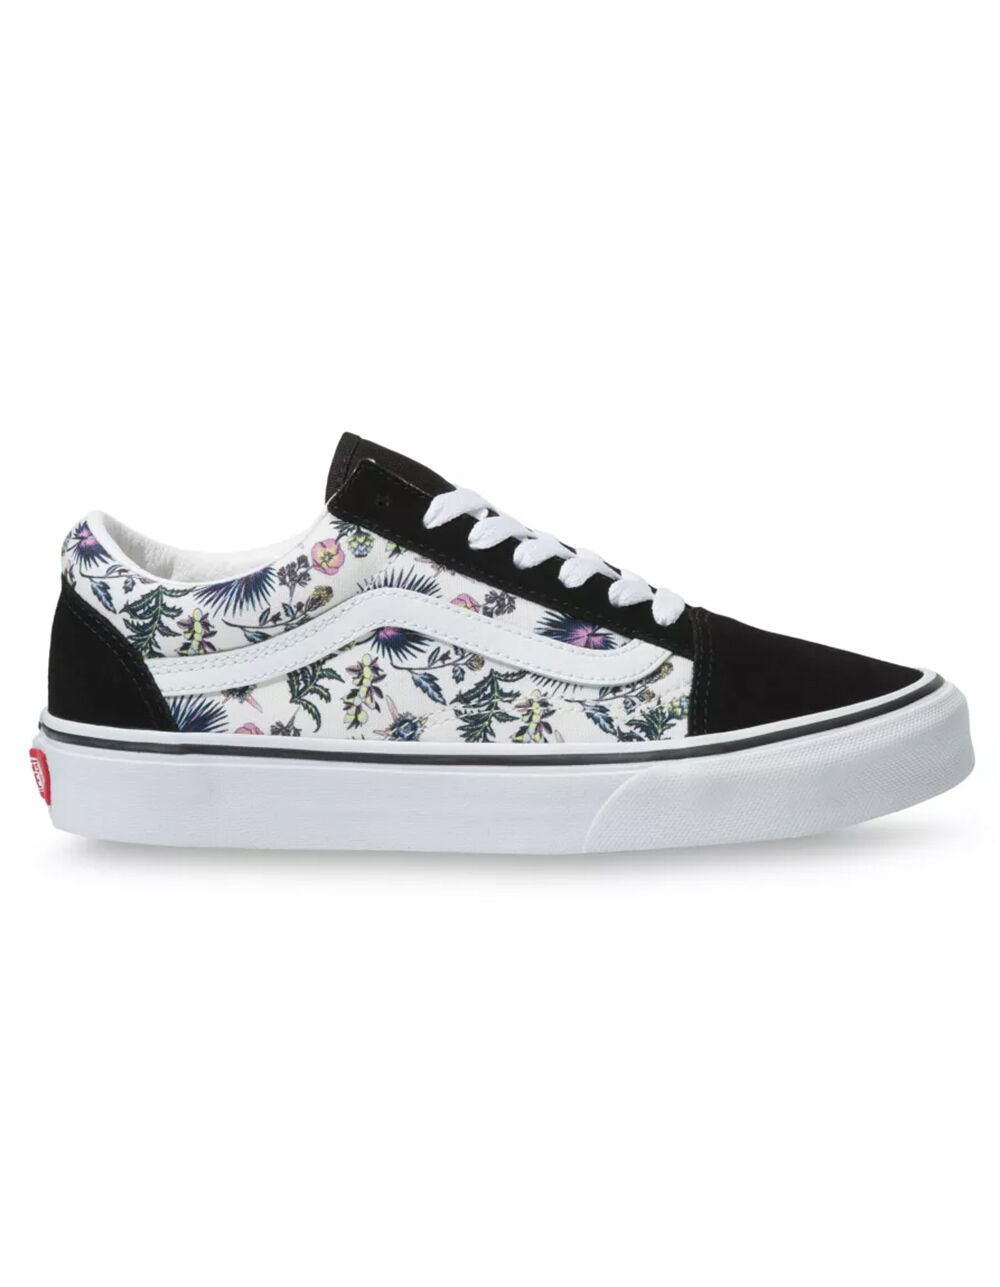 VANS Paradise Floral Old Skool Womens Shoes - ORCHID/TRUE WHITE | Tillys